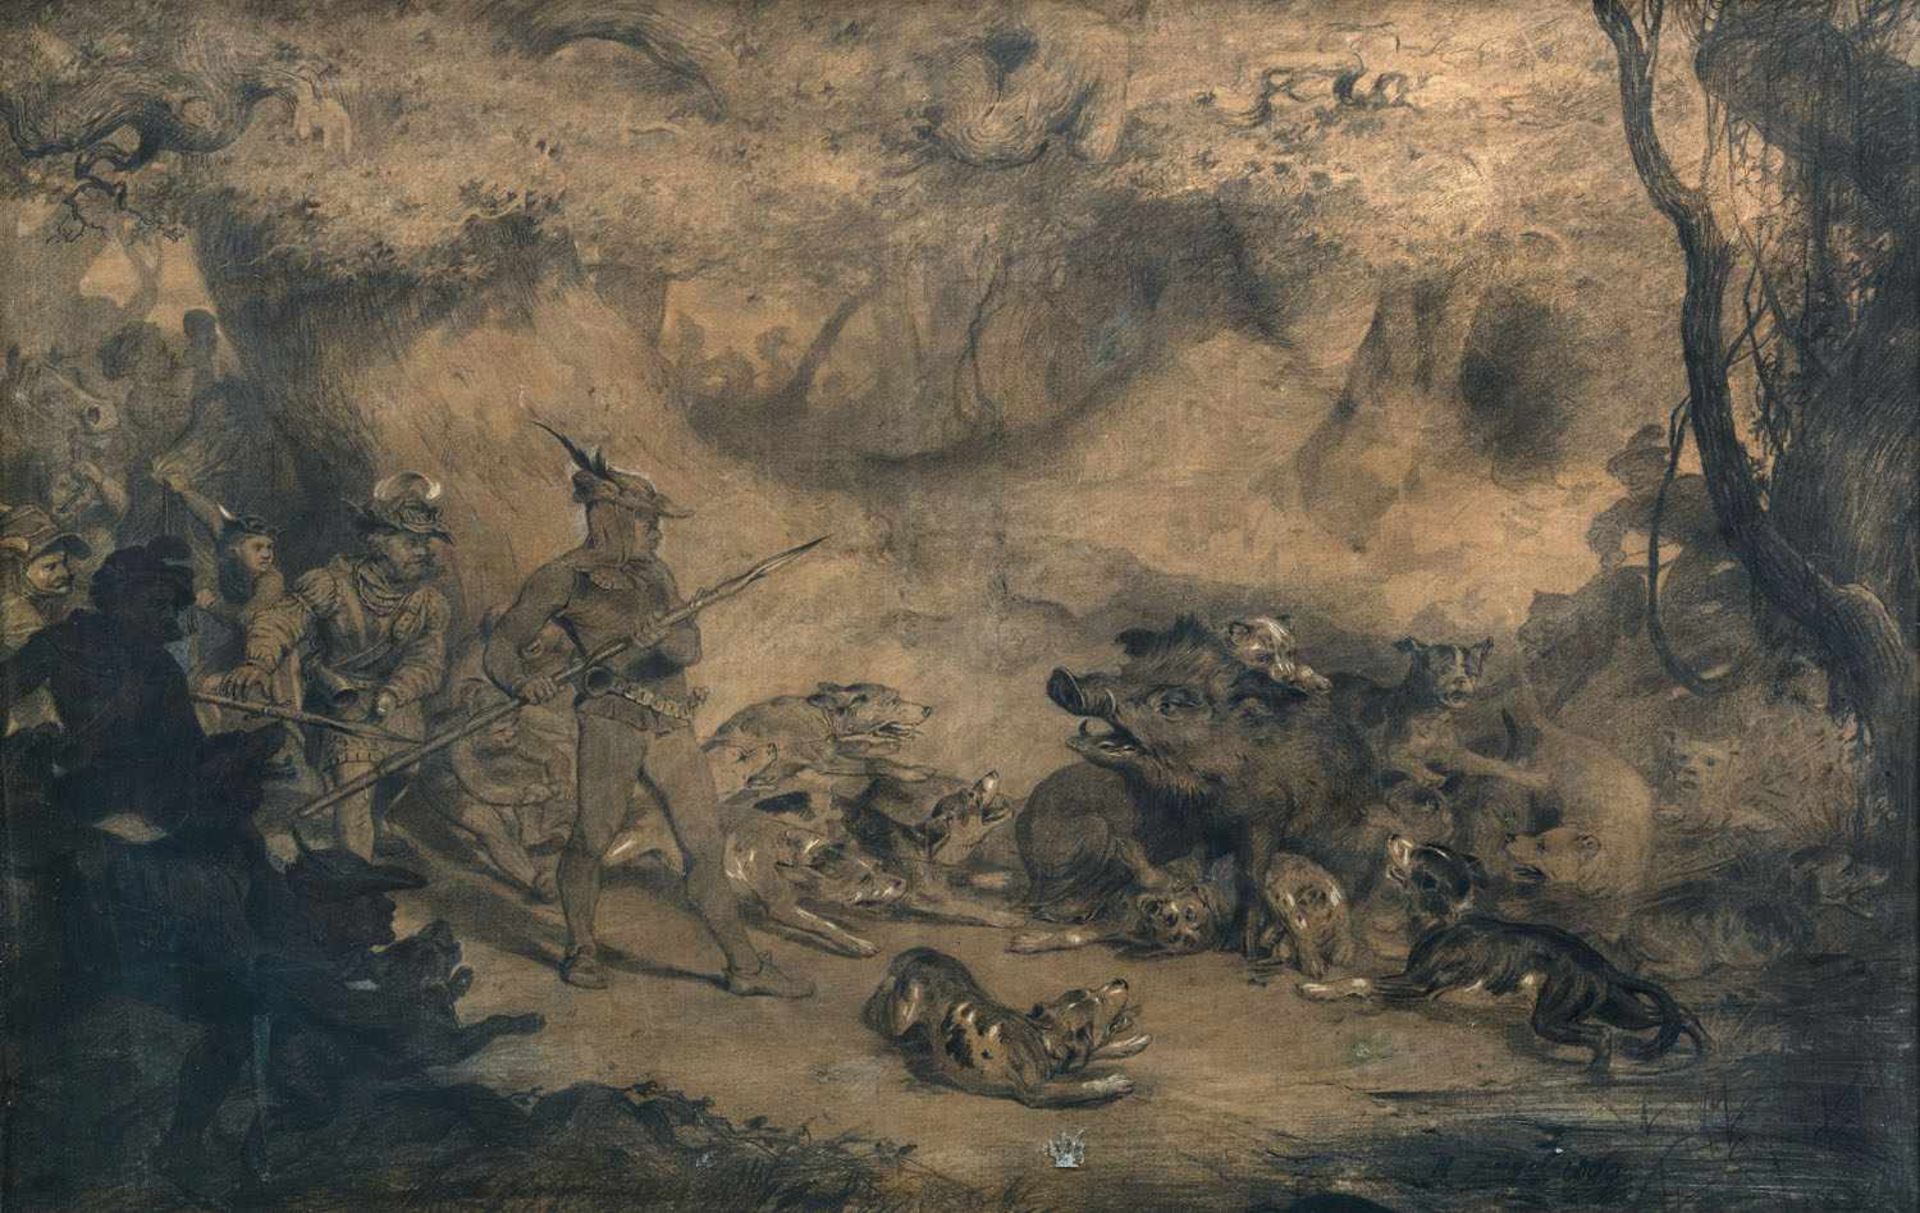 ZÜGEL, HEINRICH VON (1850-1941). Wild Boar Hunt in the Middle Ages. Mixed media/paper/canvas, signed